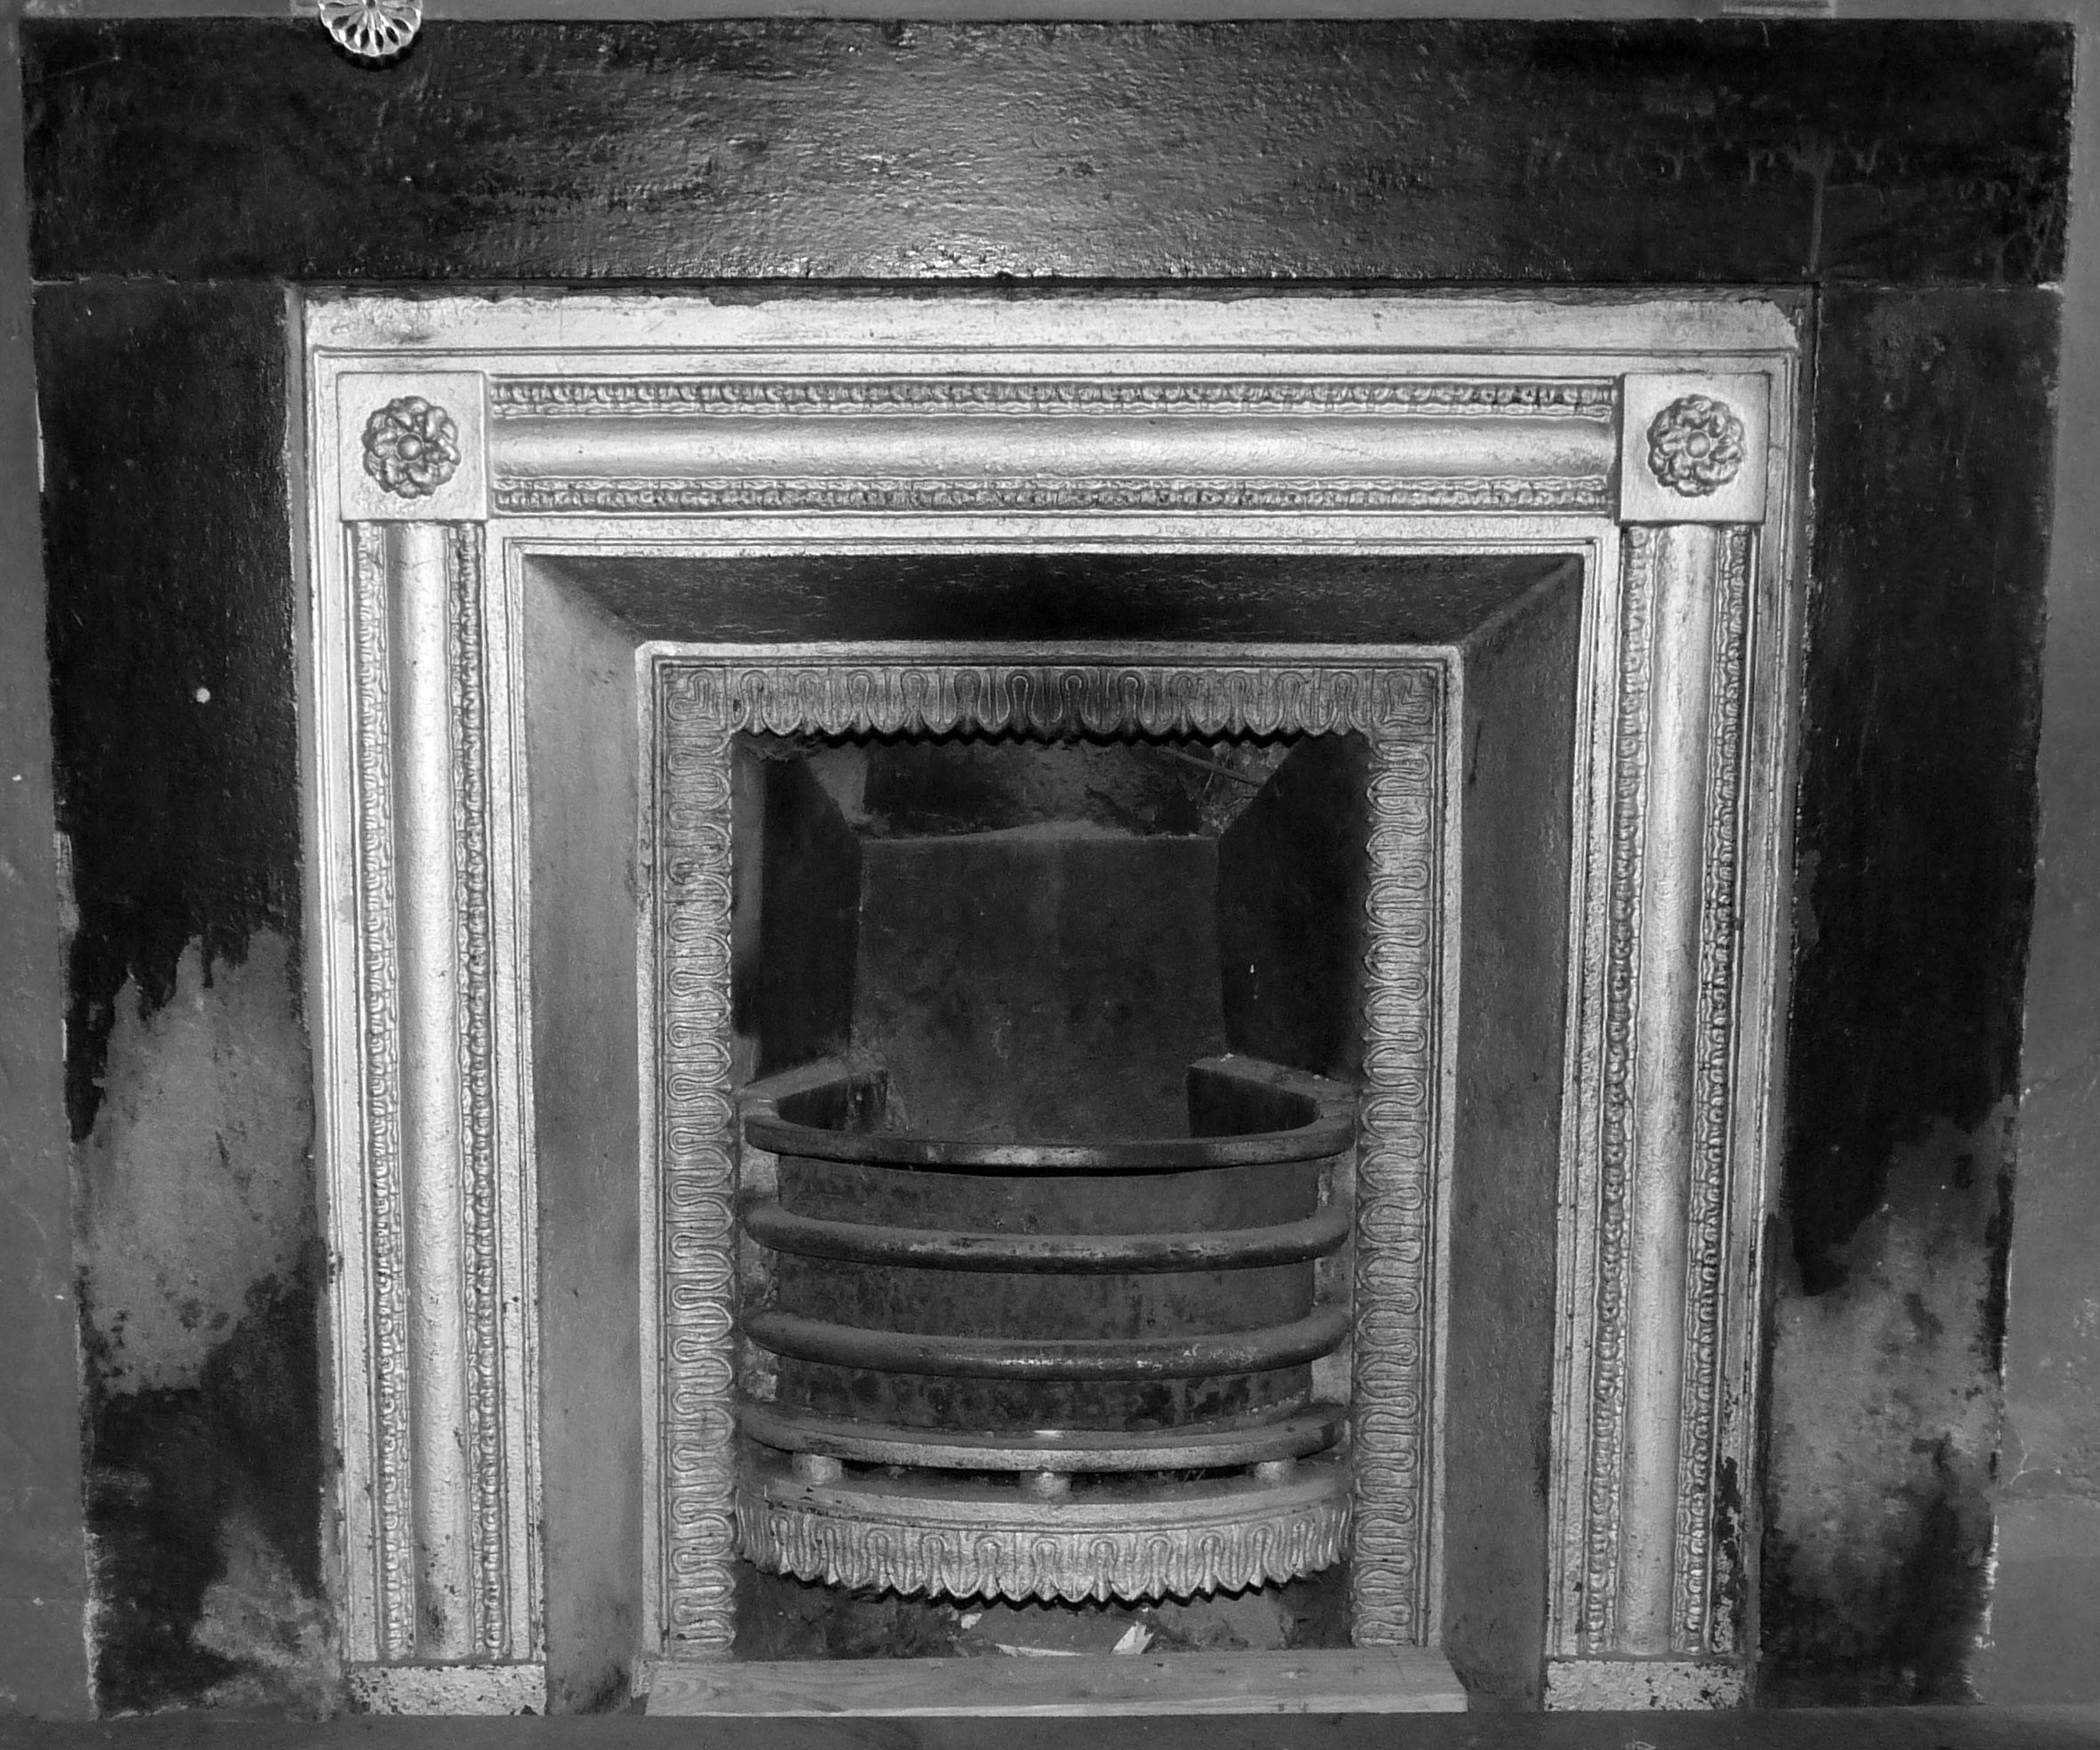 Marquis Fireplaces Beautiful Cast Iron Fireplace In the Bedroom Painted Silver sometime